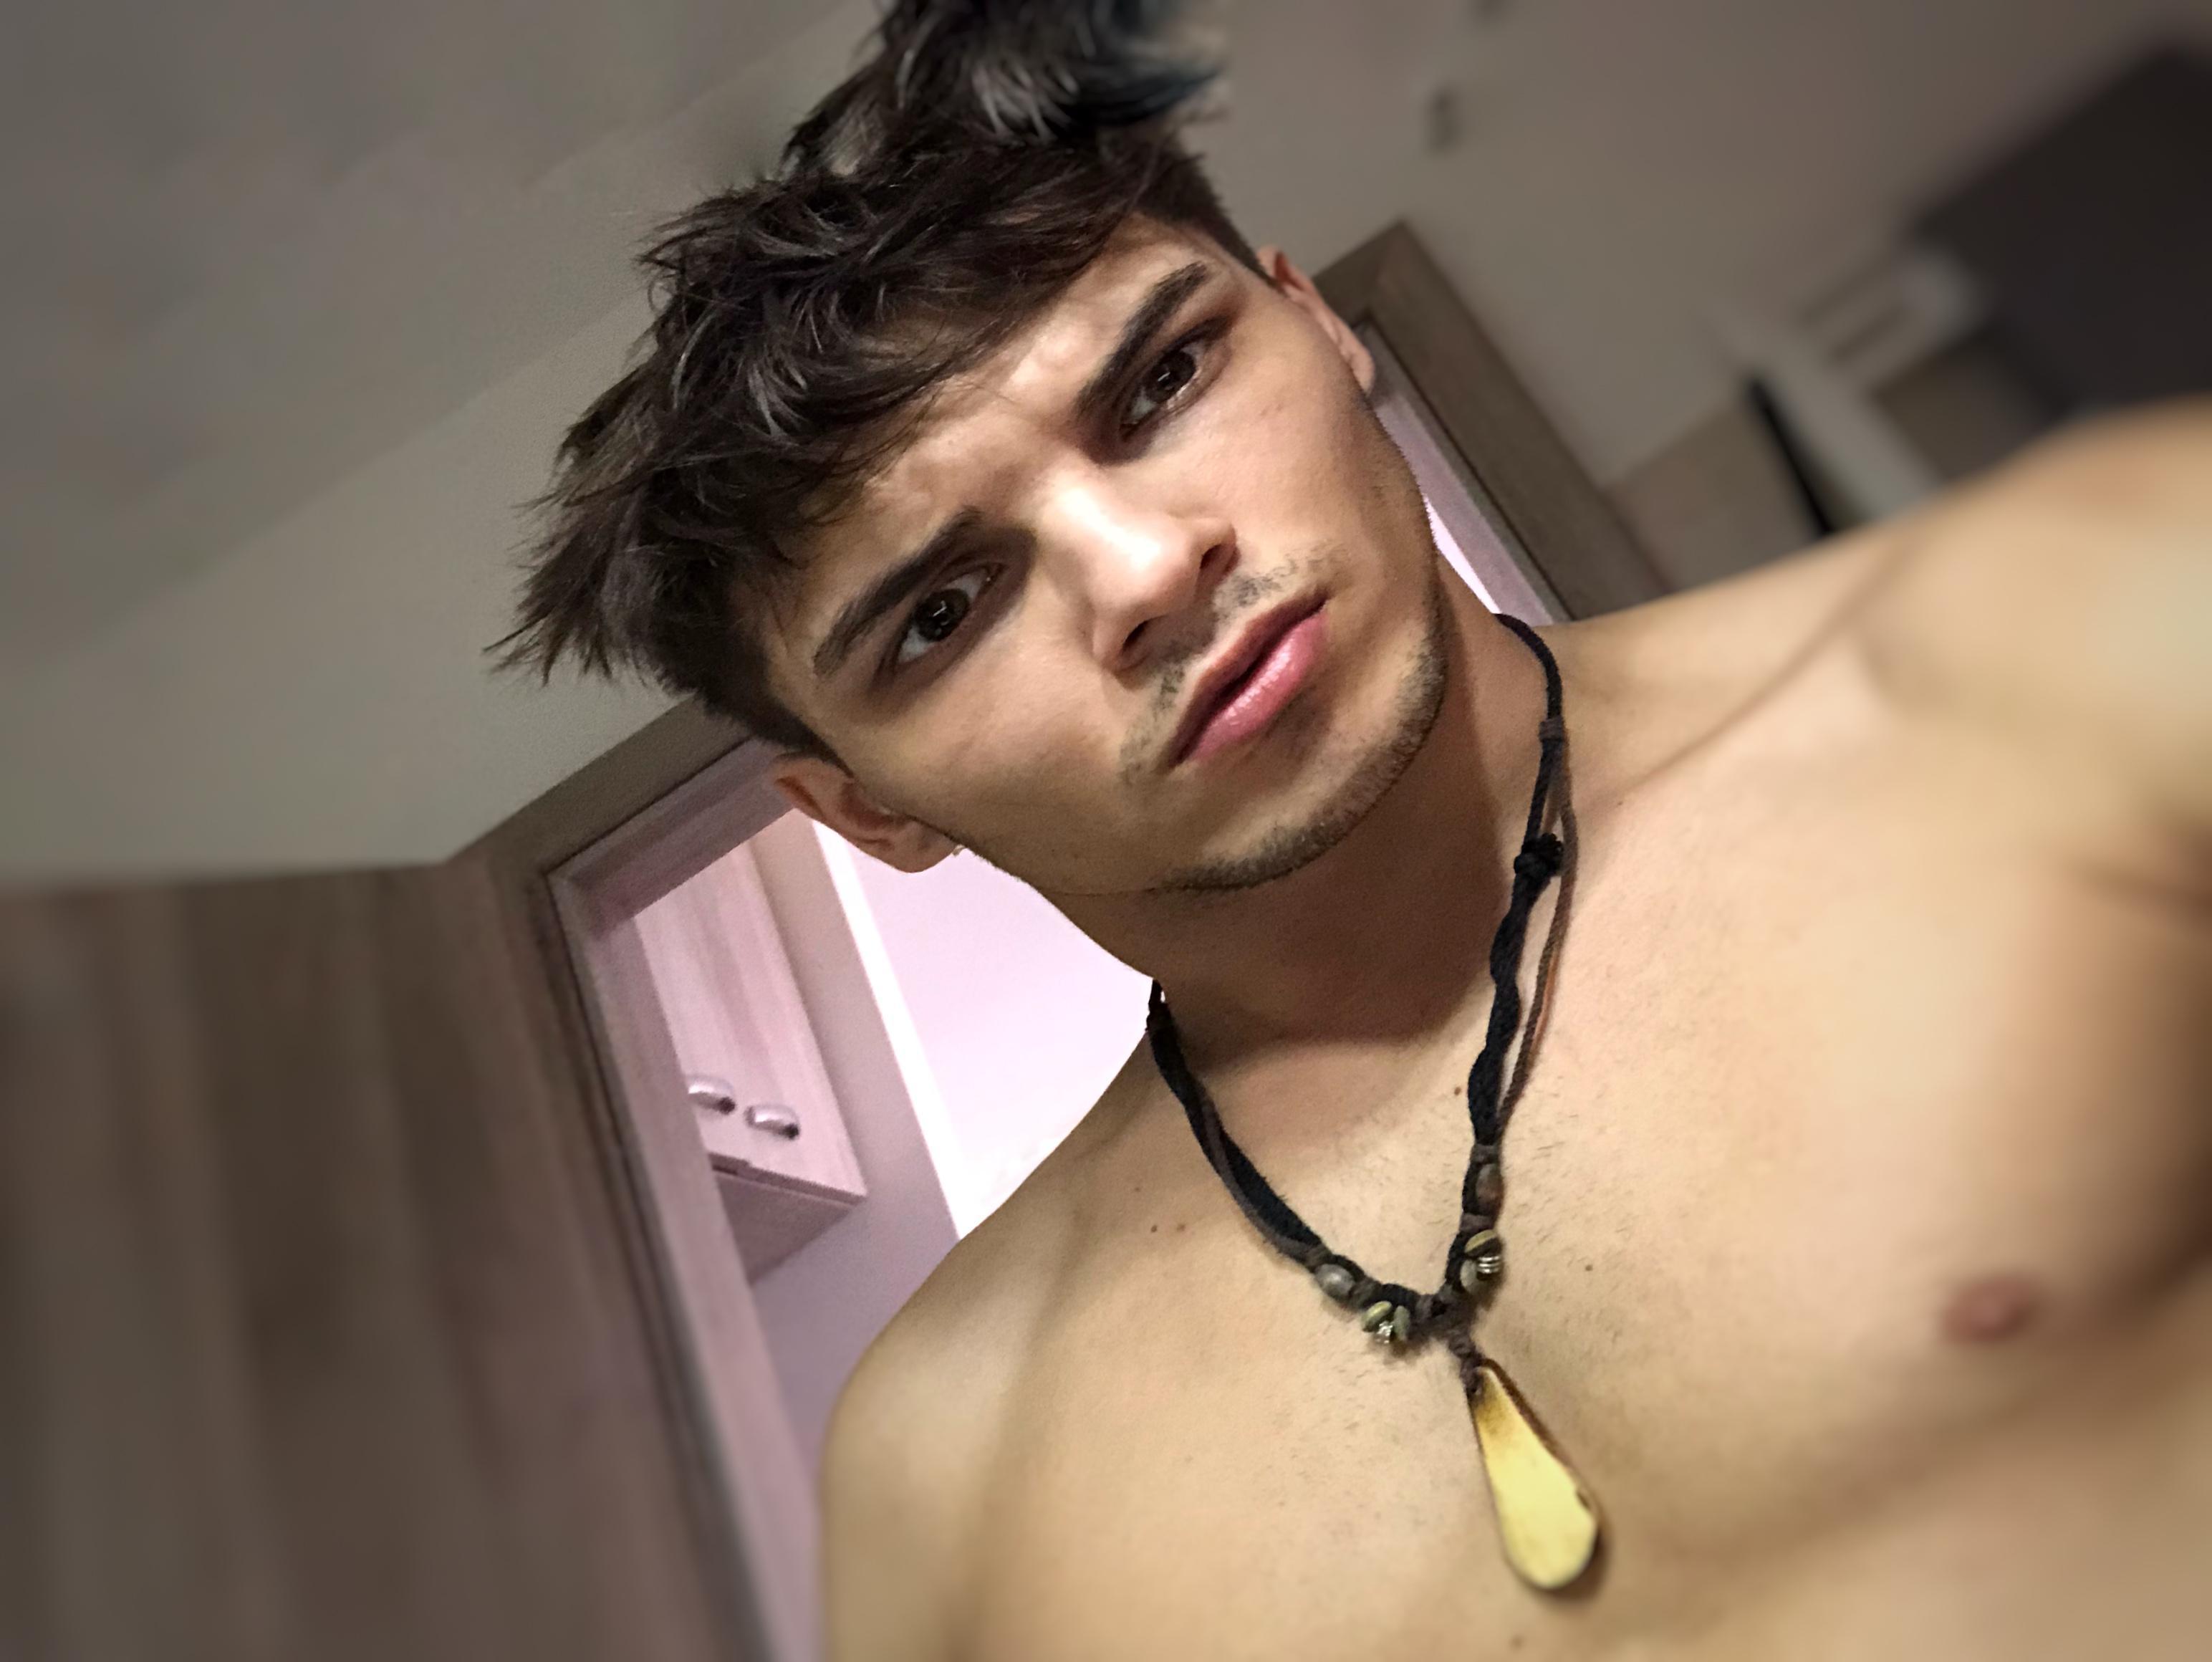 dirty adult chat Angelfrank4